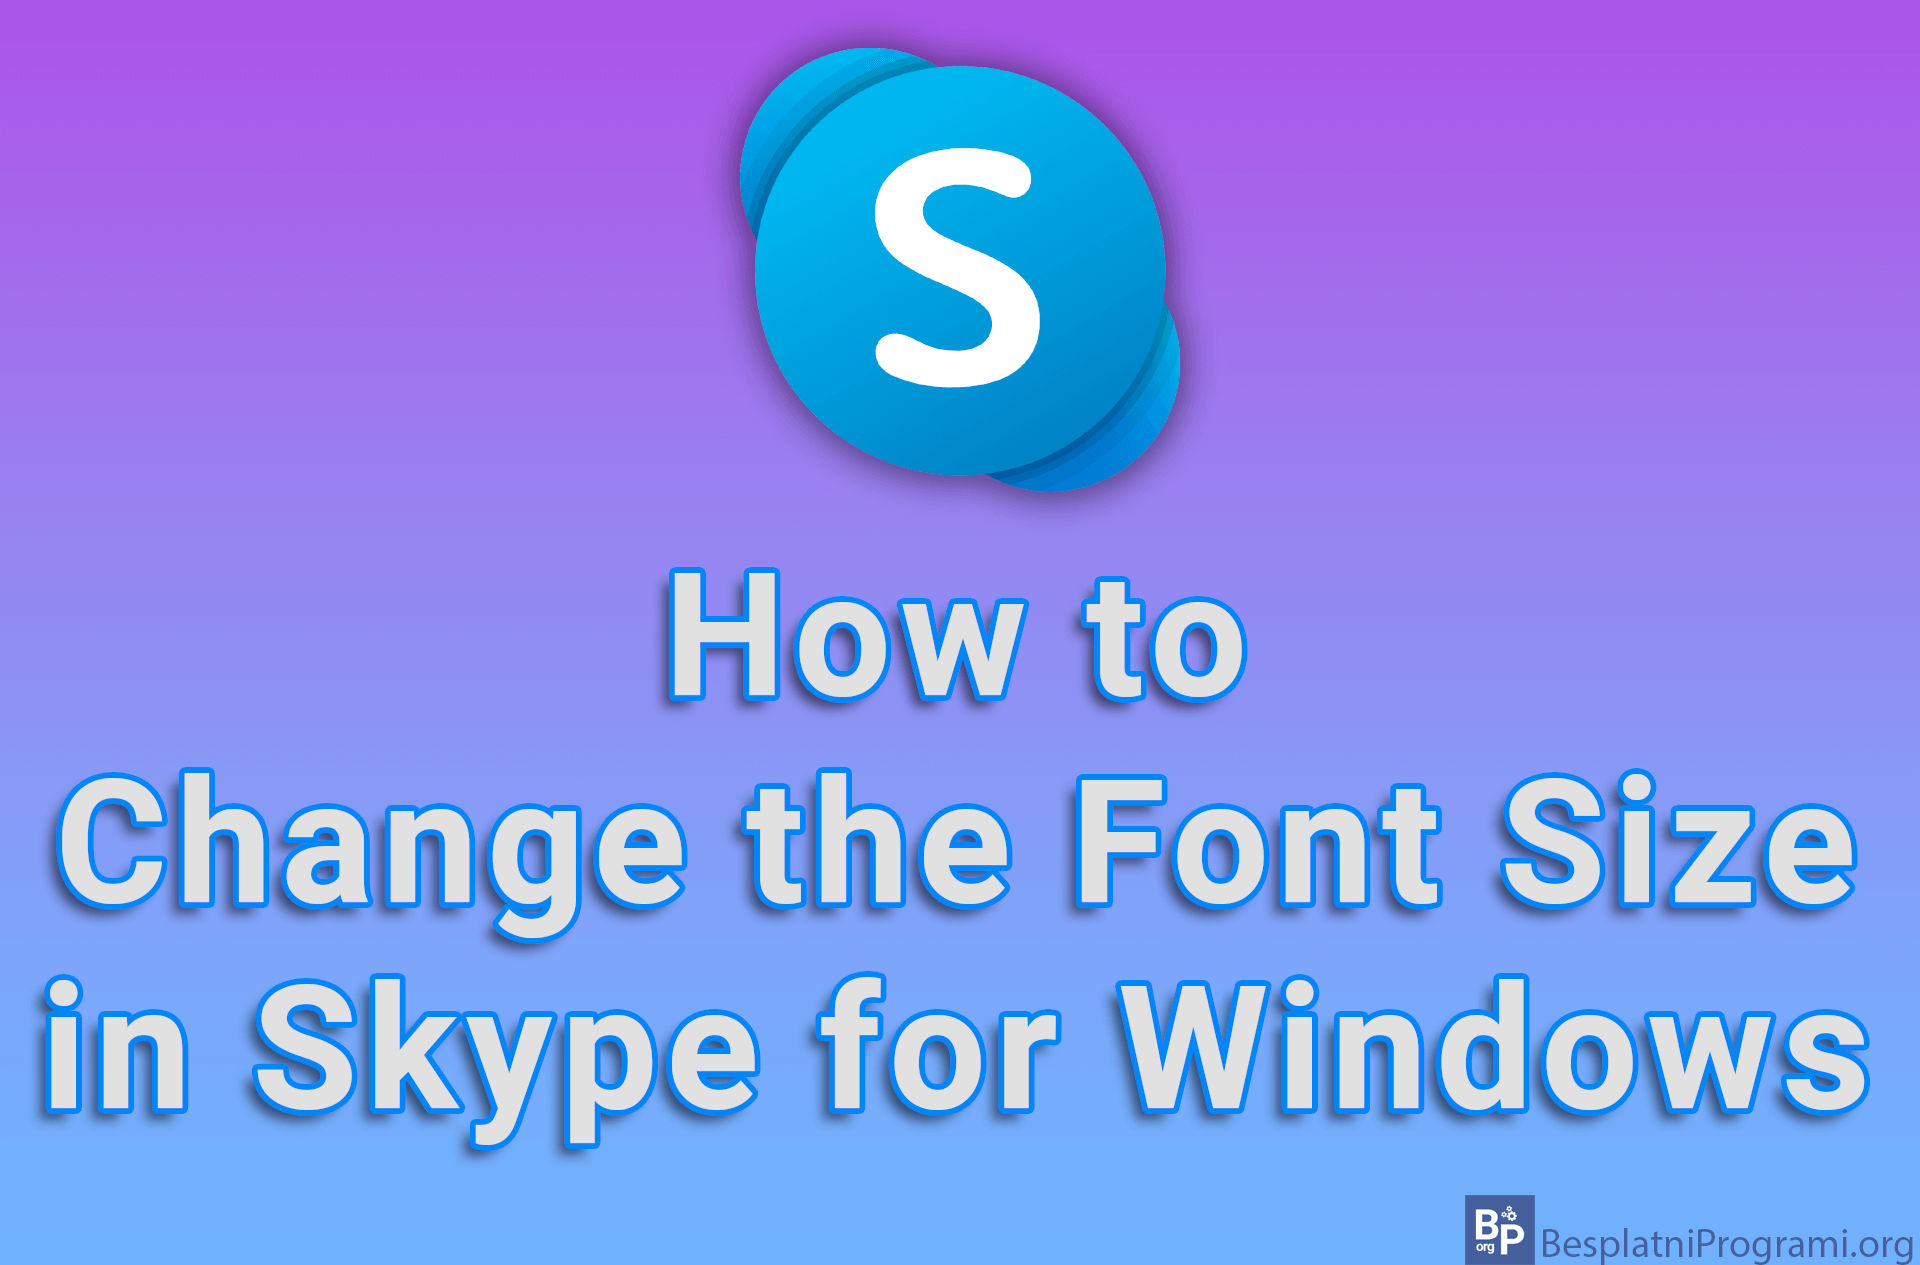 How to Change the Font Size in Skype for Windows